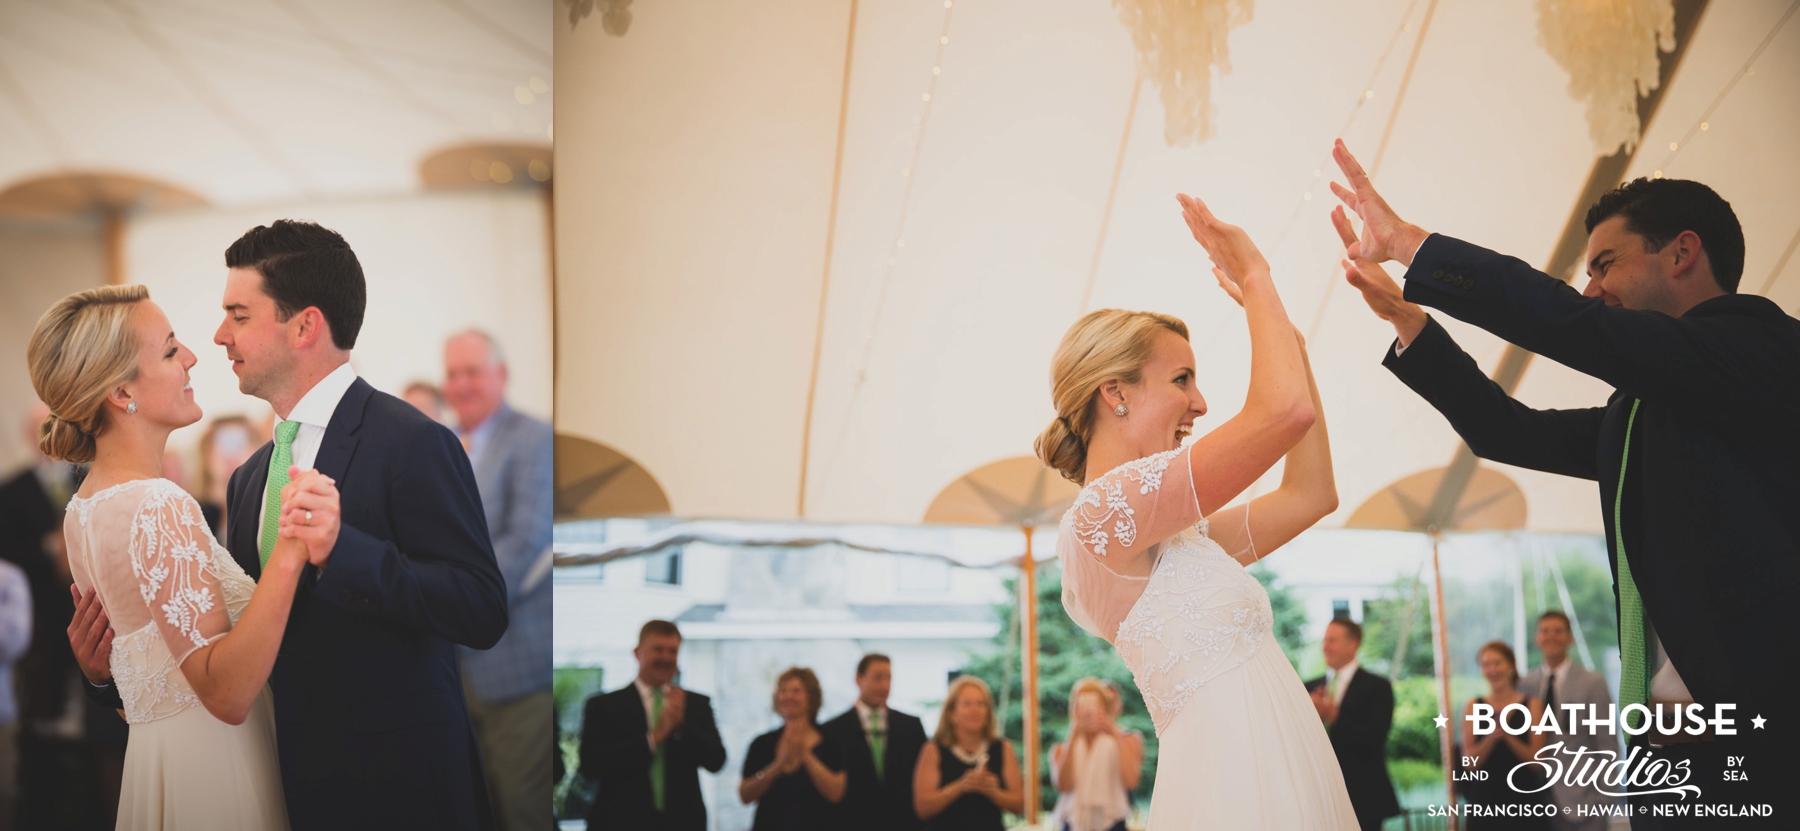 First Dance. And High Fives of course.